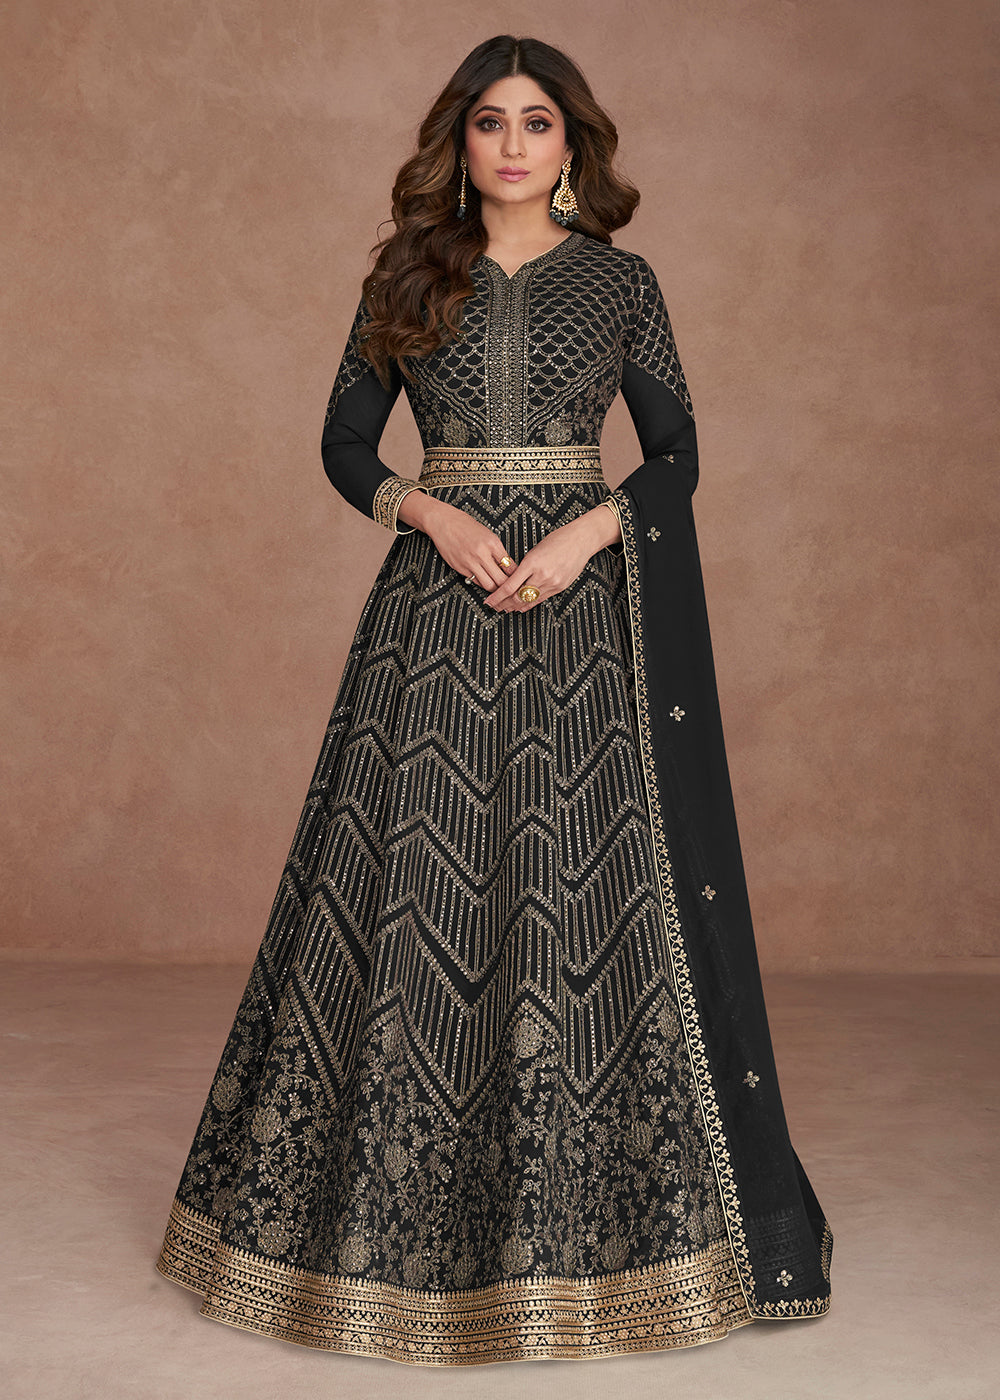 Buy Now Sequined Embroidered Black Shamita Shetty Anarkali Gown Online in USA, UK, Australia, New Zealand, Canada, Italy & Worldwide at Empress Clothing. 